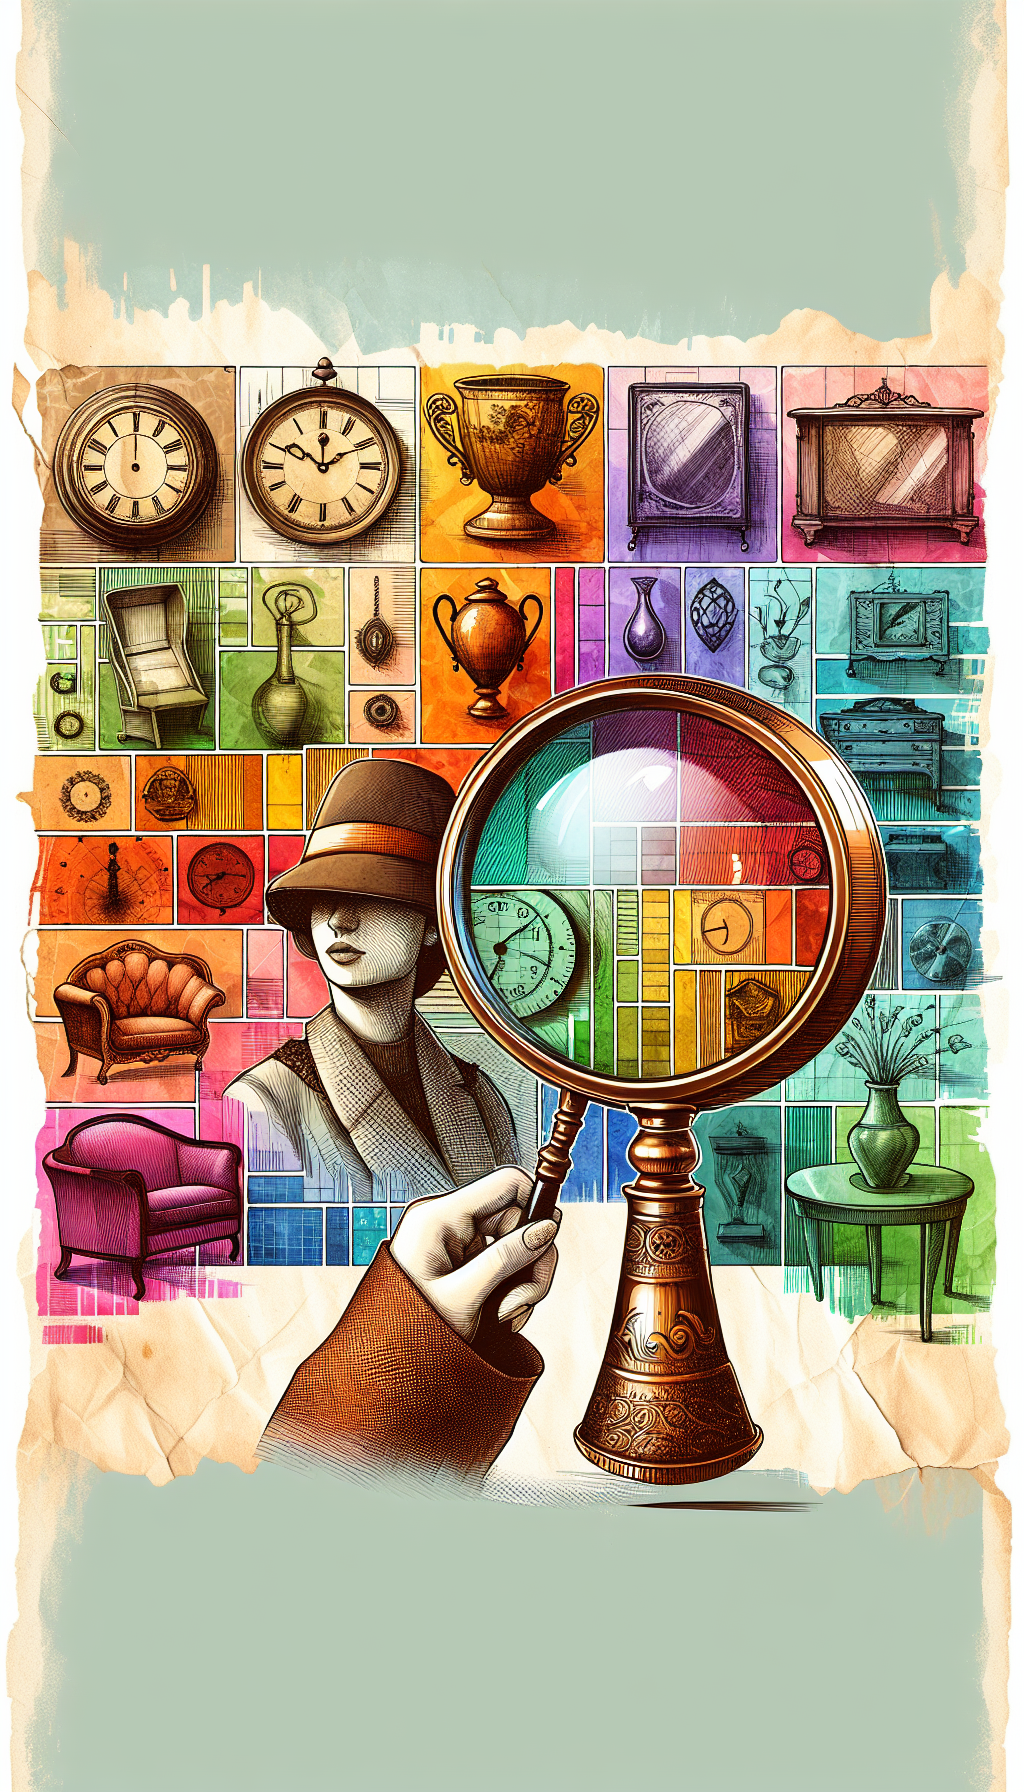 An illustration showing an antique magnifying glass hovering over a colorful, patchwork timeline, with classic items like a vintage clock, a vase, and furniture fading from sepia to vibrant hues, symbolizing their age being identified. In one corner, a thoughtful appraiser with a detective hat examines a piece, scribbling notes, blending the visual styles of sketch, watercolor, and digital art.